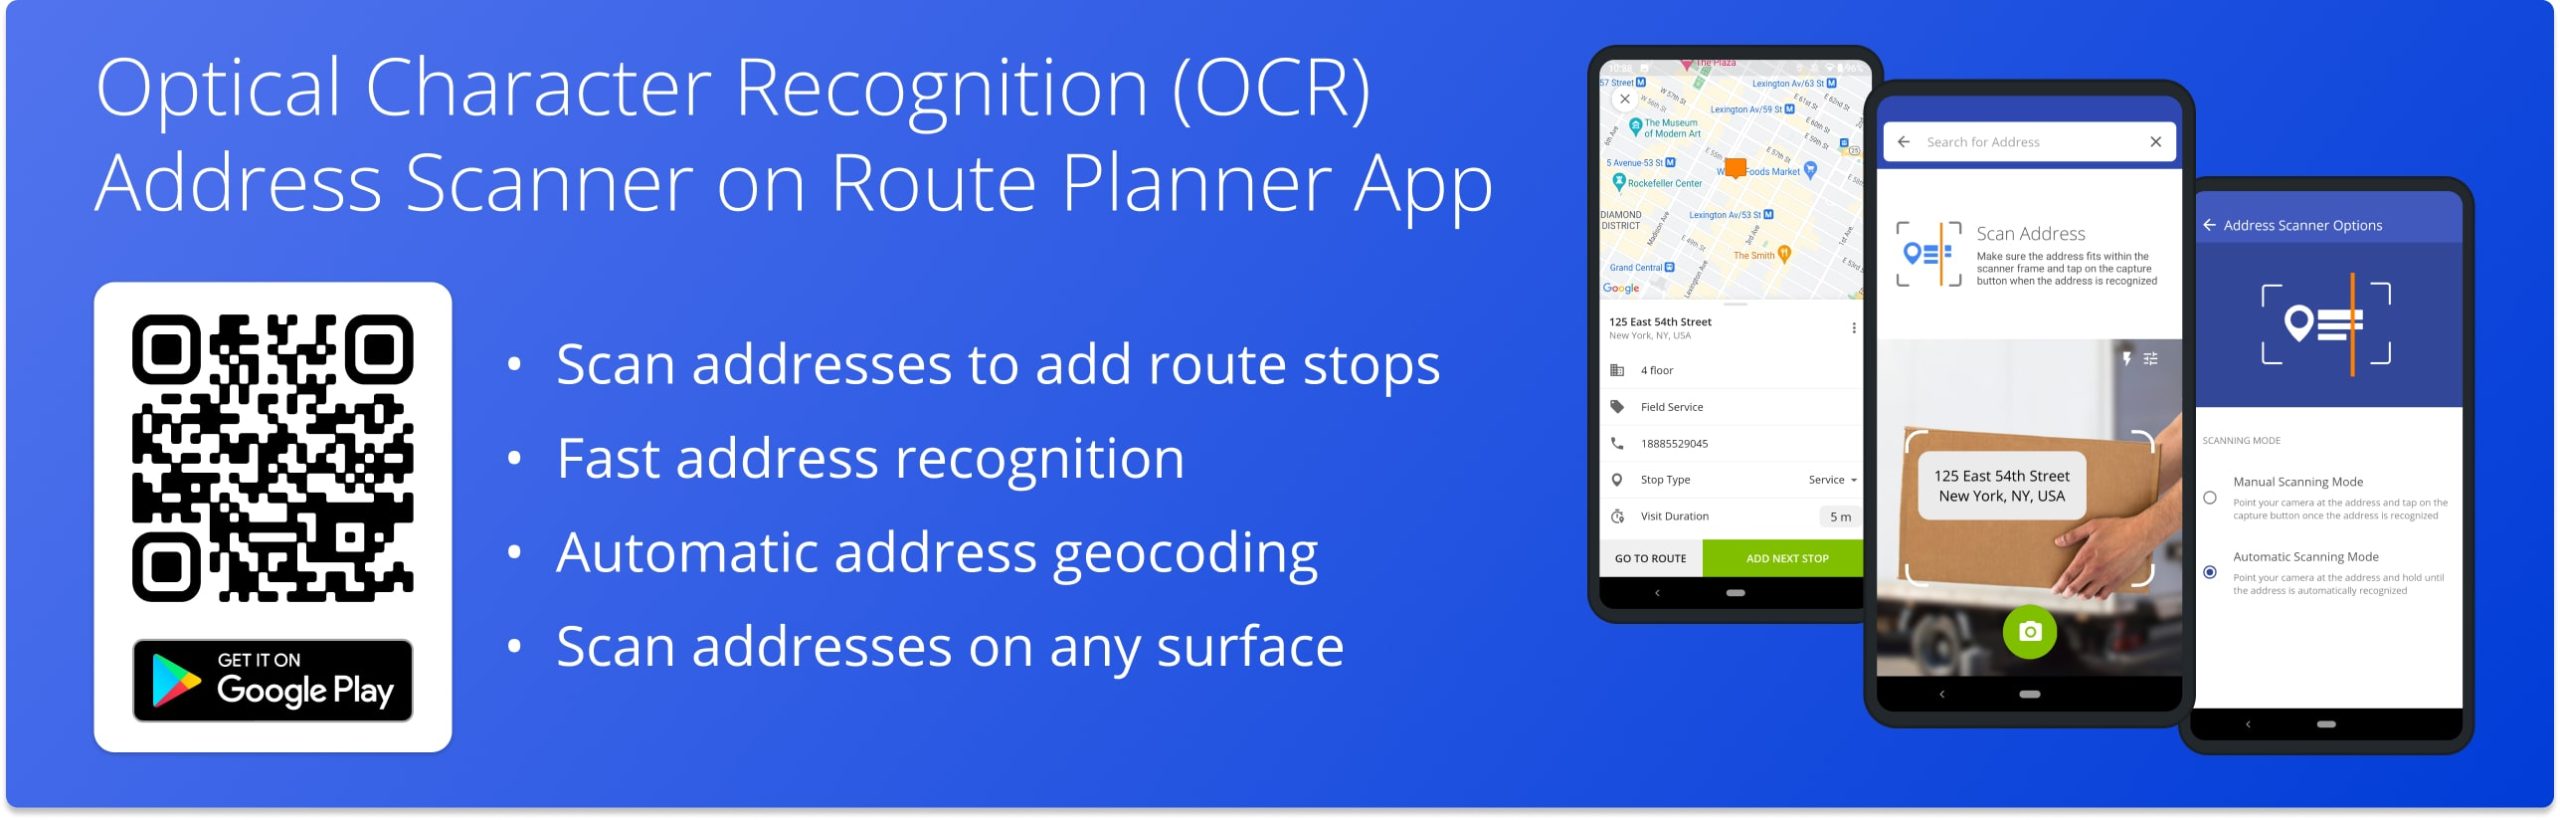 Optical character recognition (OCR) address scanner on Route4Me's Android Route Planner app.